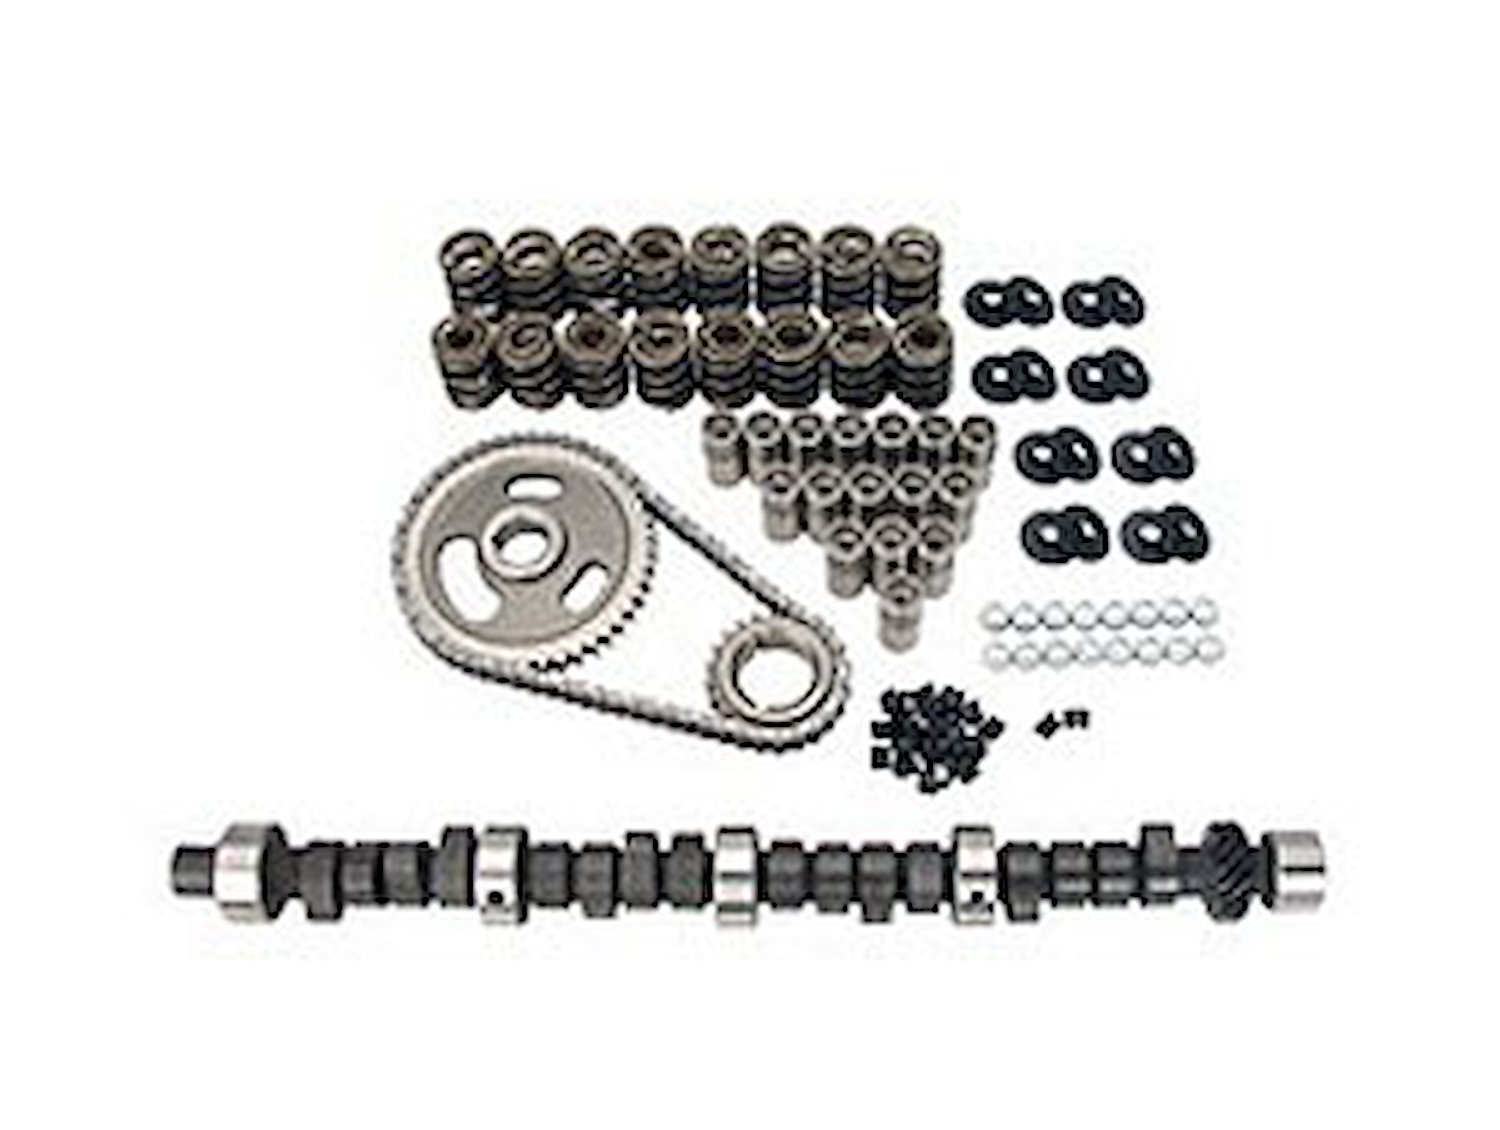 Big Mutha" Thumpr Hydraulic Flat Tappet Camshaft Complete Kit Lift .507"/.494" Duration 295/312 RPM Range 2500-6400